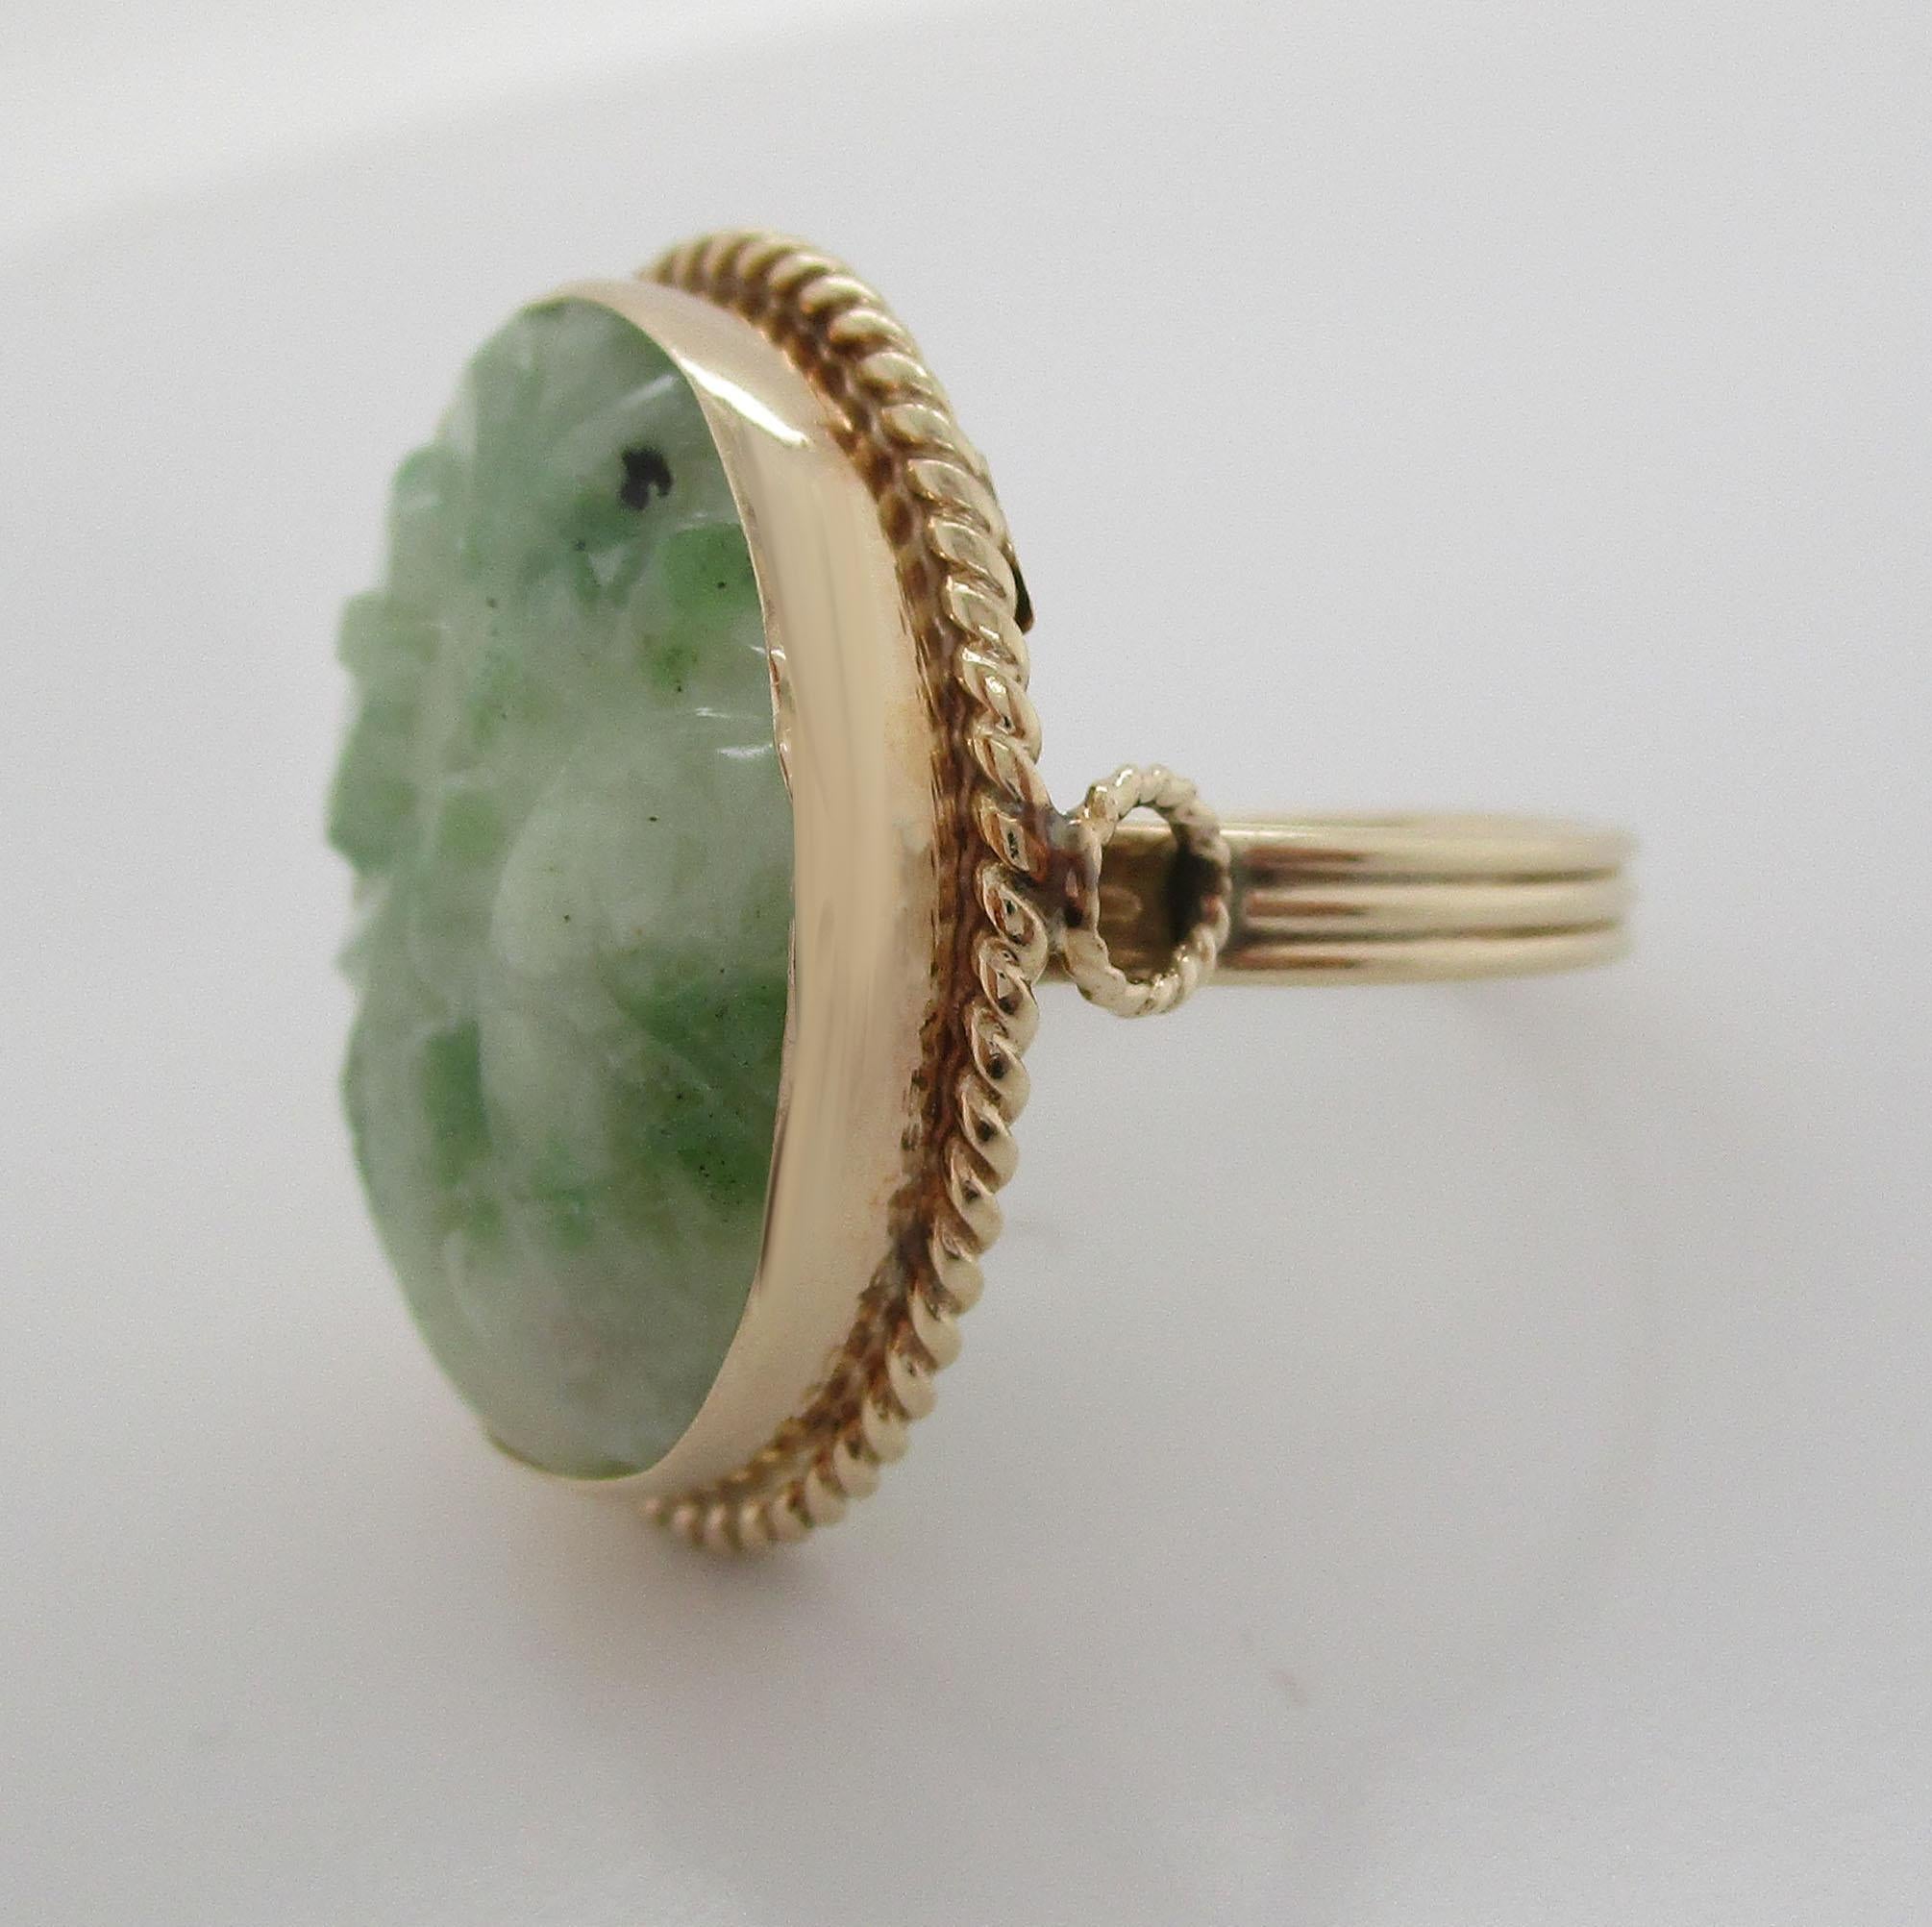 This remarkable mid-century statement ring brings together bright 14k yellow gold and soft green jade carved with an elegant pattern. The ring is the picture of elegance, from the complementary contrast of bright yellow gold and mottled green to the